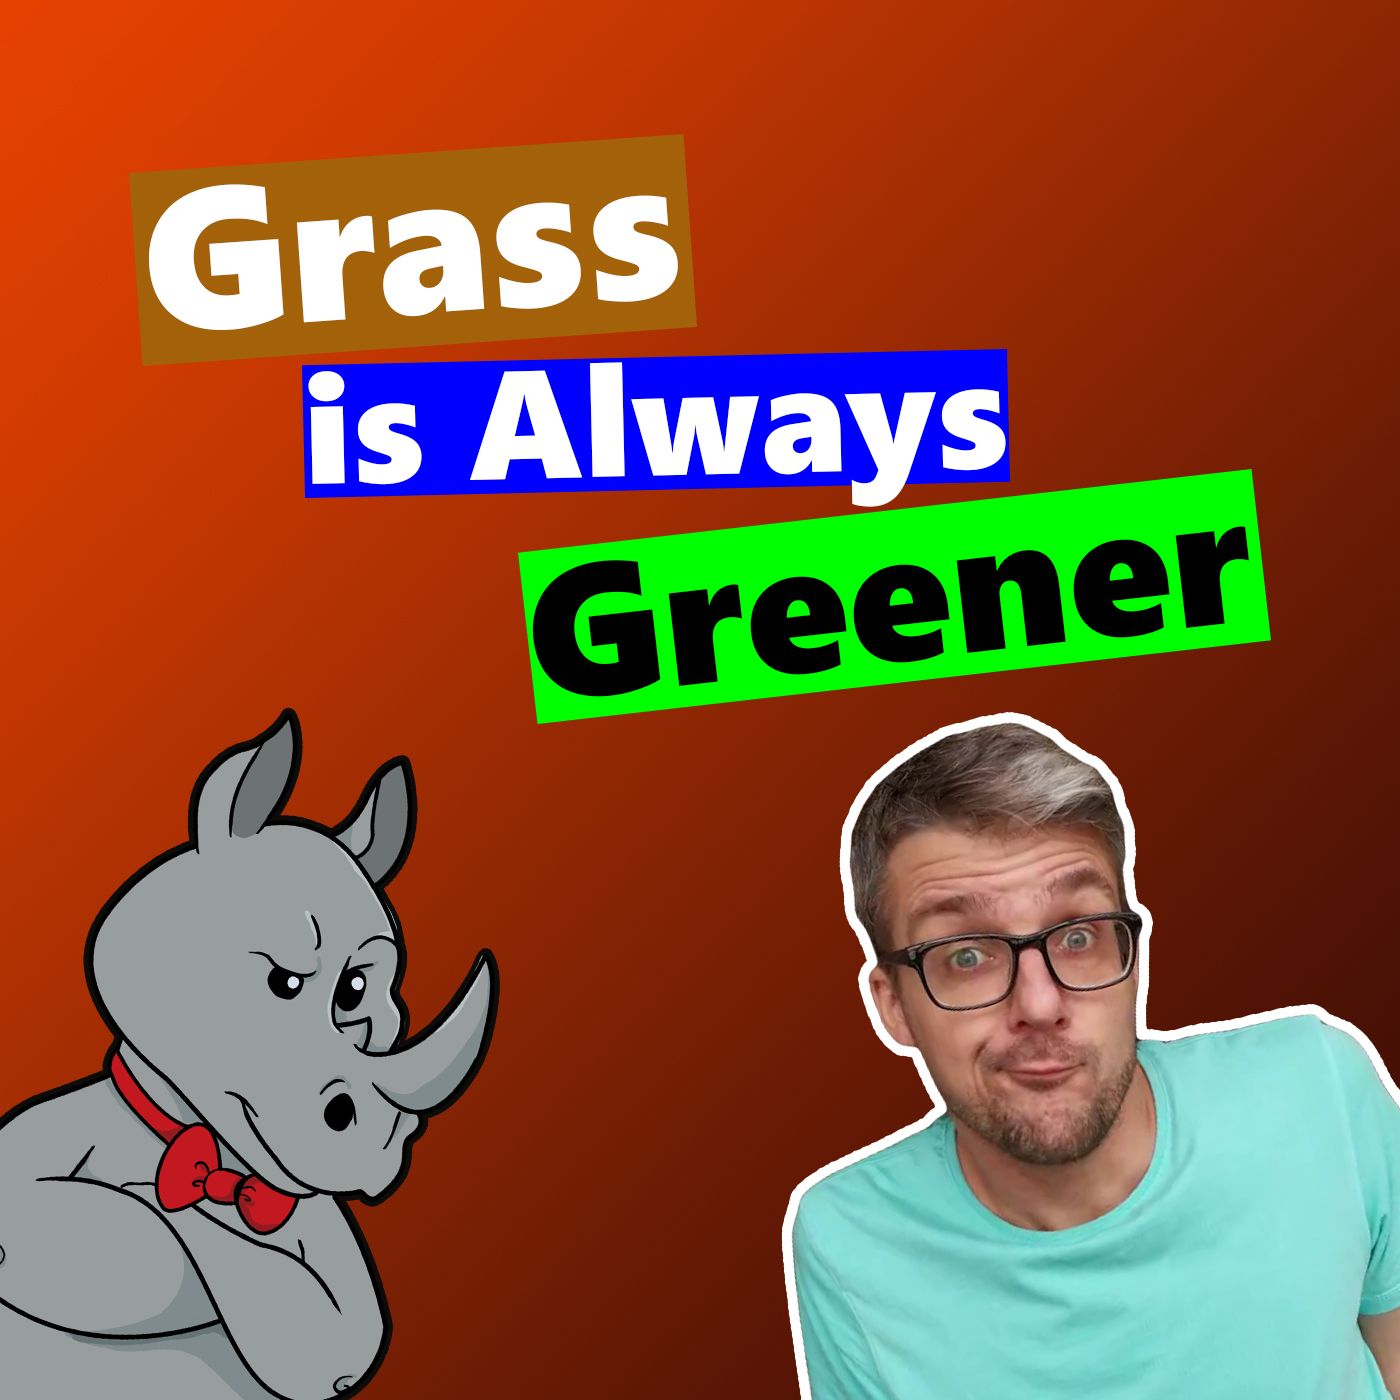 There's No Way The Gospel Authors Could Have Known About GREEN GRASS!